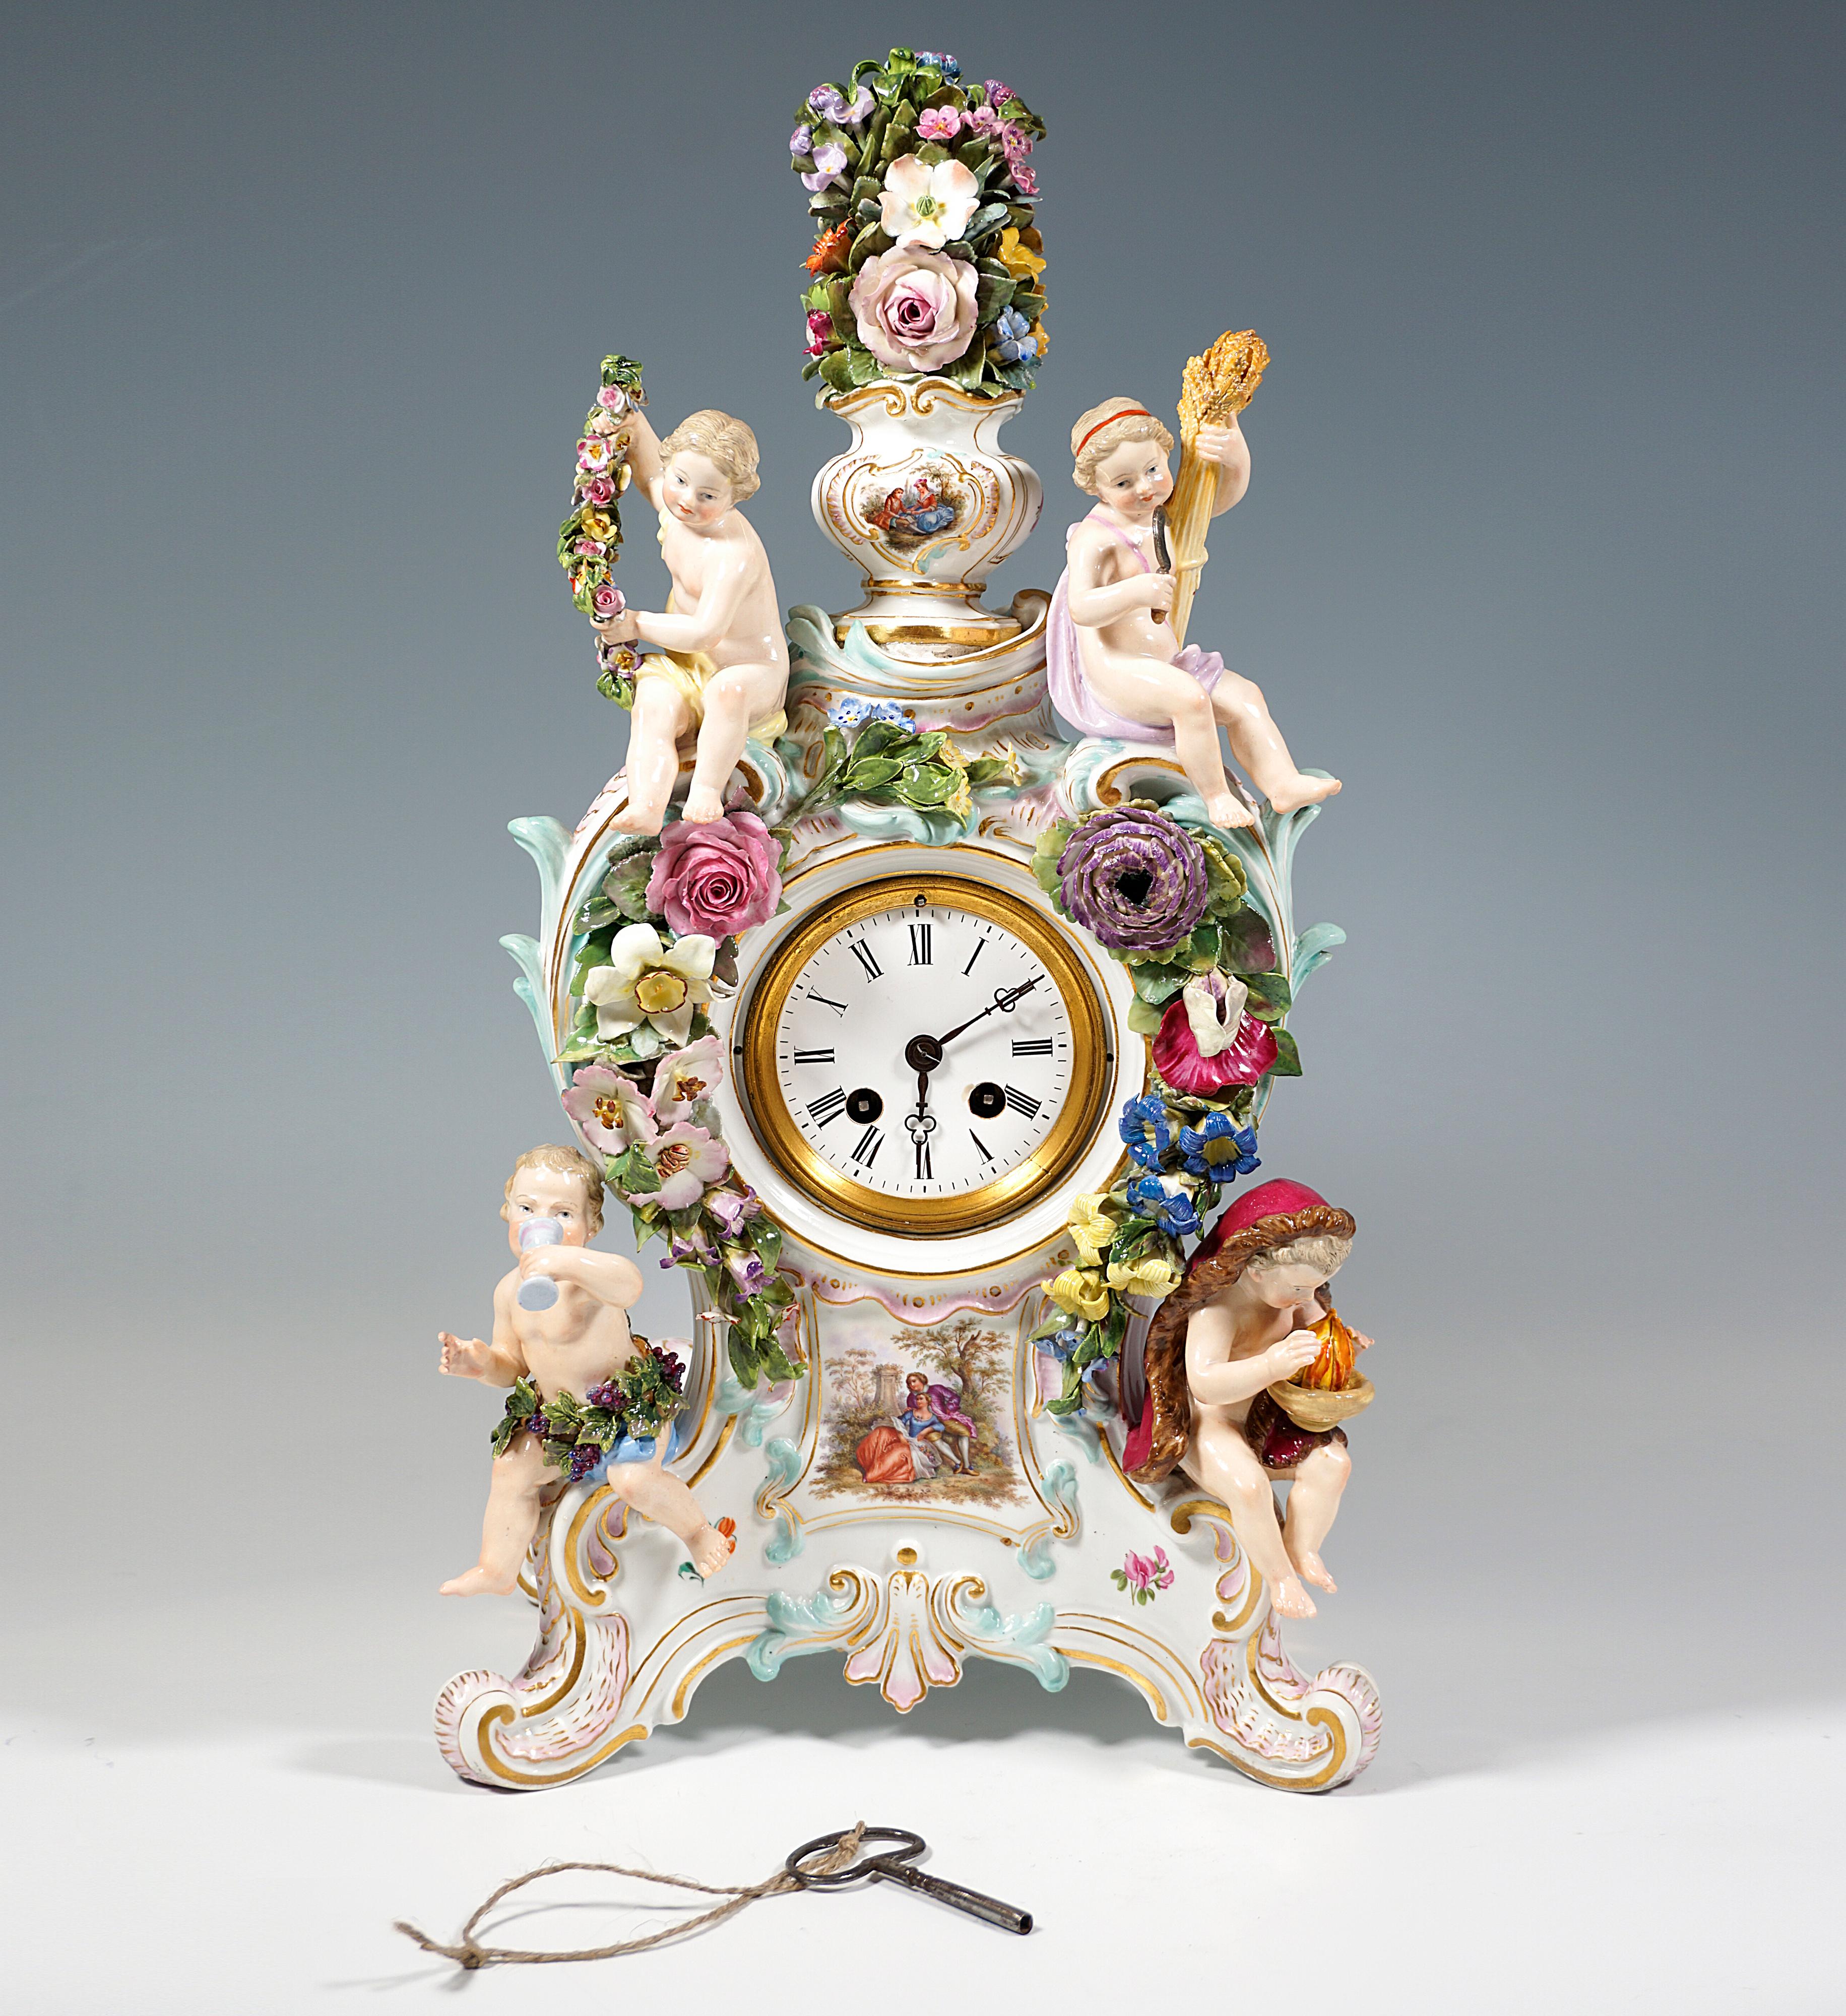 The clock case was designed by Ernst August Leuteritz using old moulds in the Rococo style: The clock case rises on a base with gold-highlighted rocailles, richly decorated with delicate, sculpturally moulded flowers, leaves and rocailles